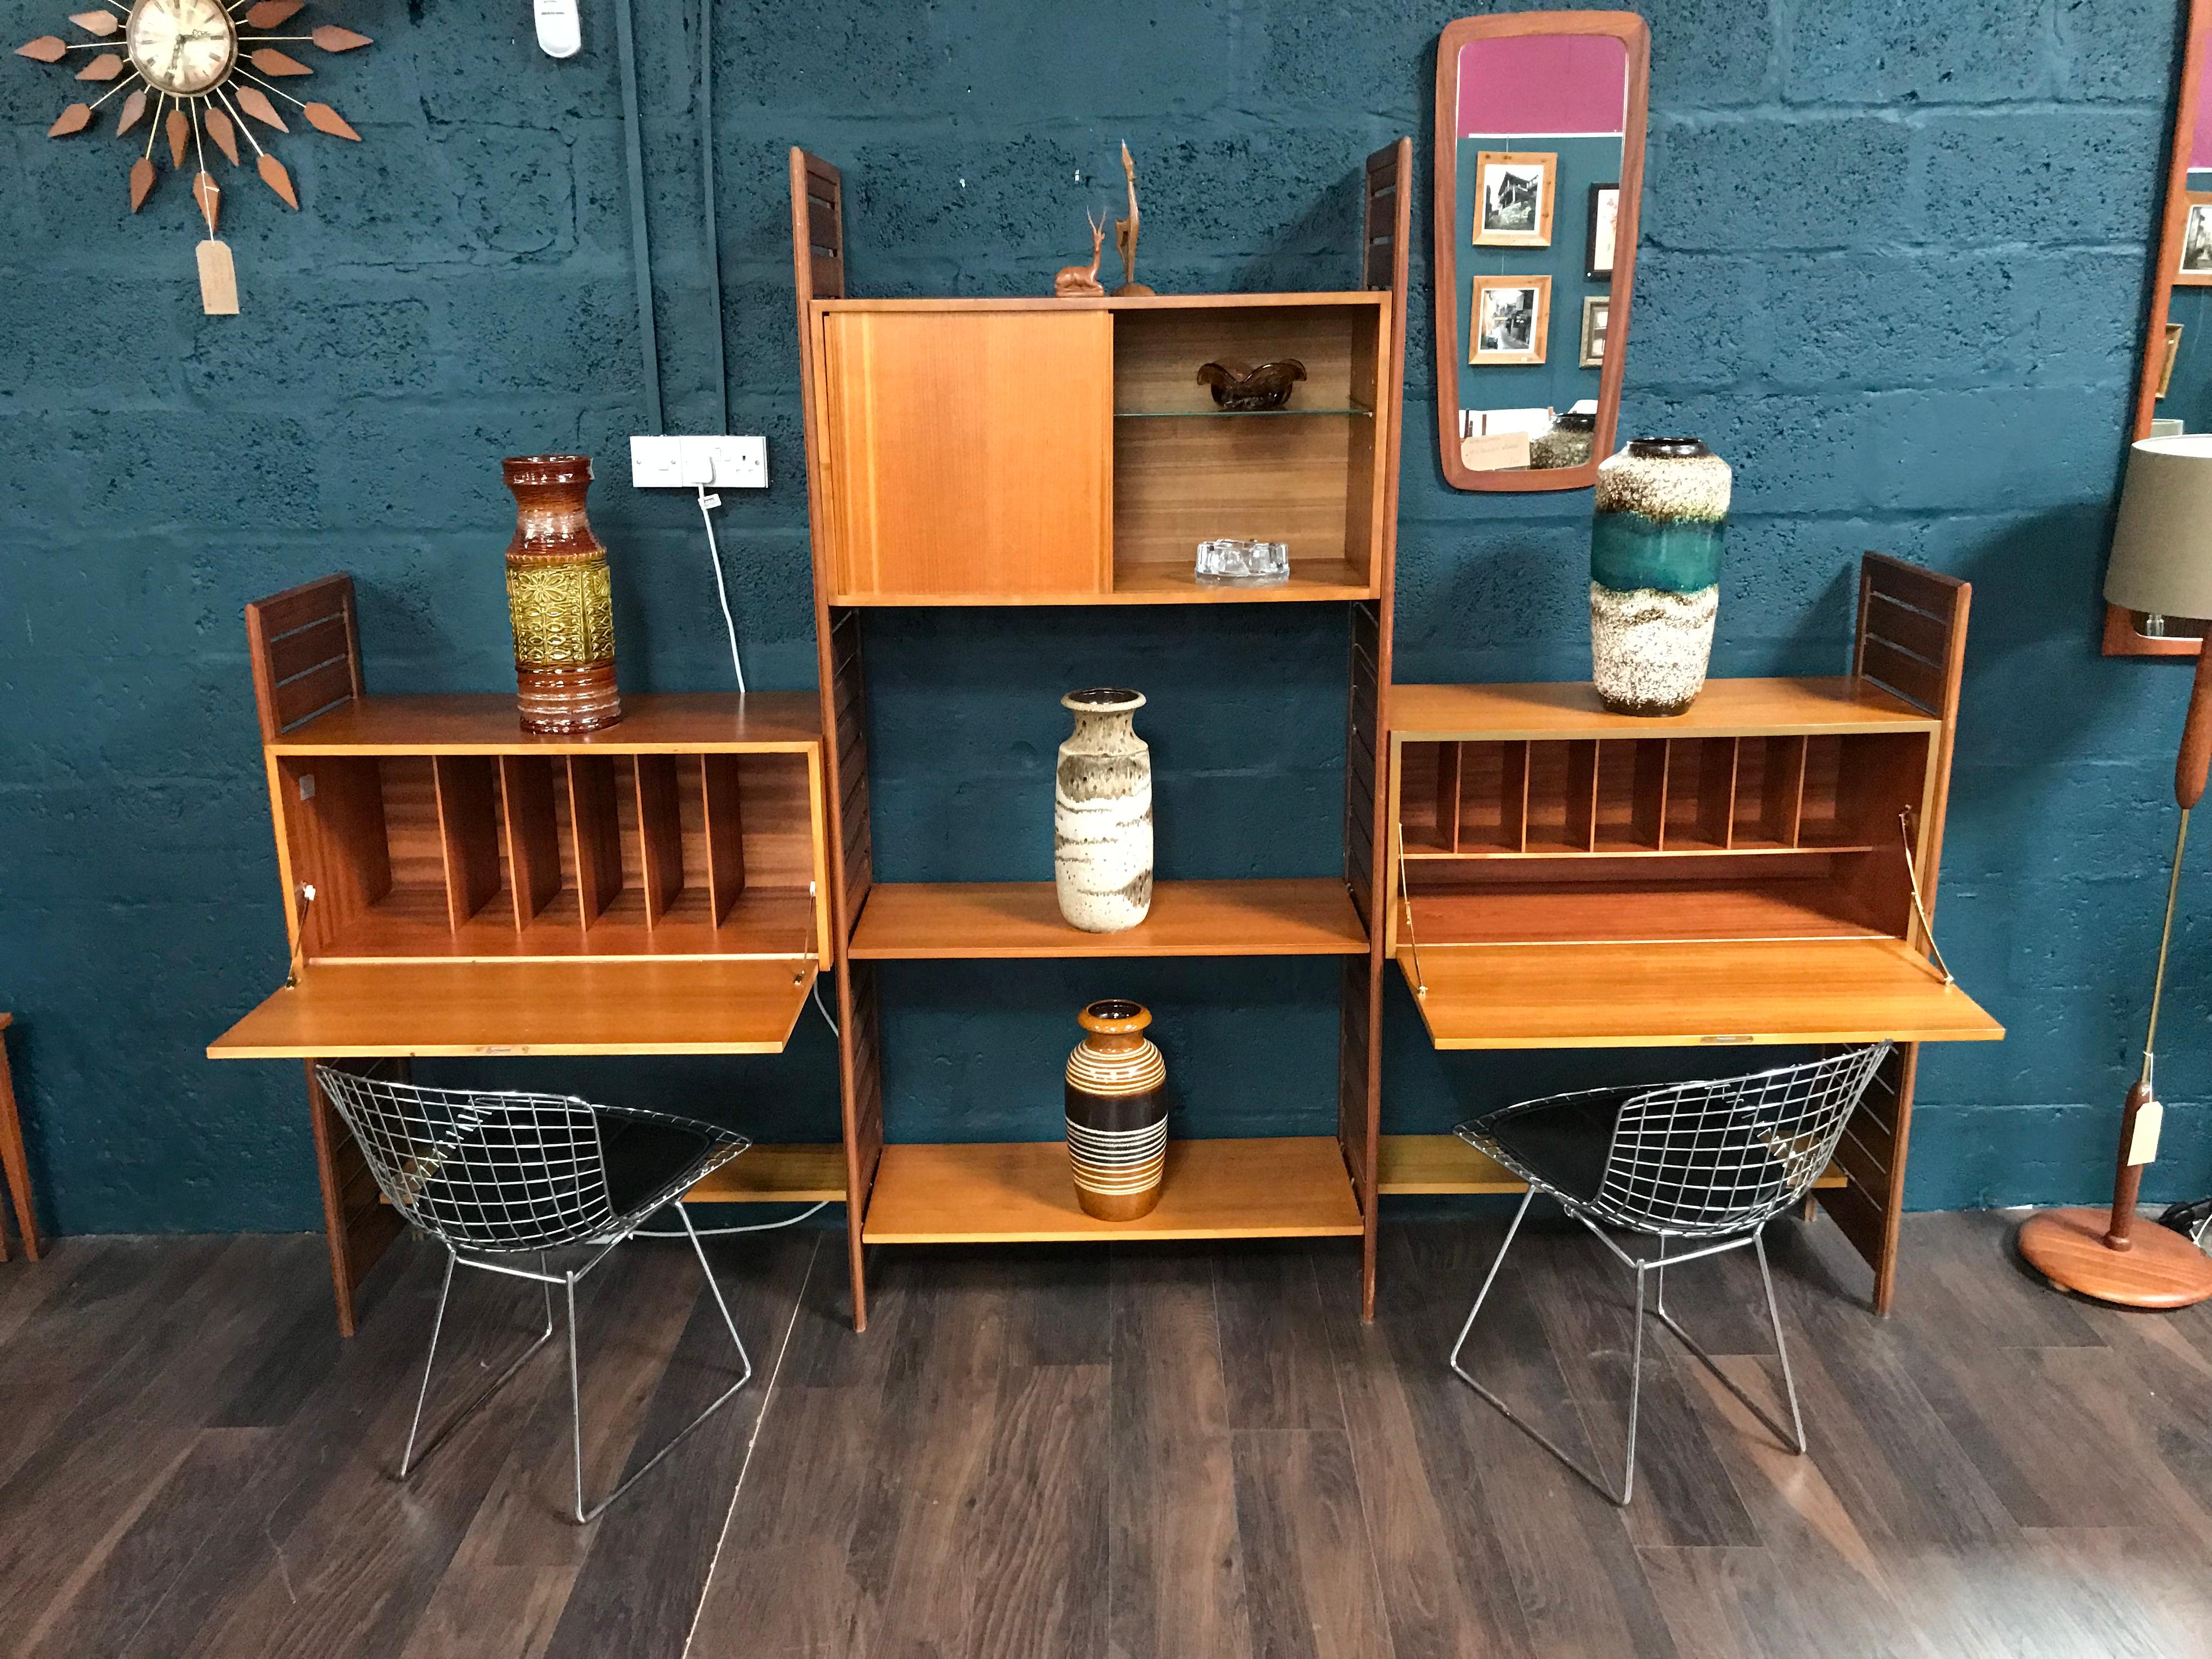 20th Century 3-Bay Ladderax Teak Midcentury Shelving System by Robert Heal for Staples For Sale